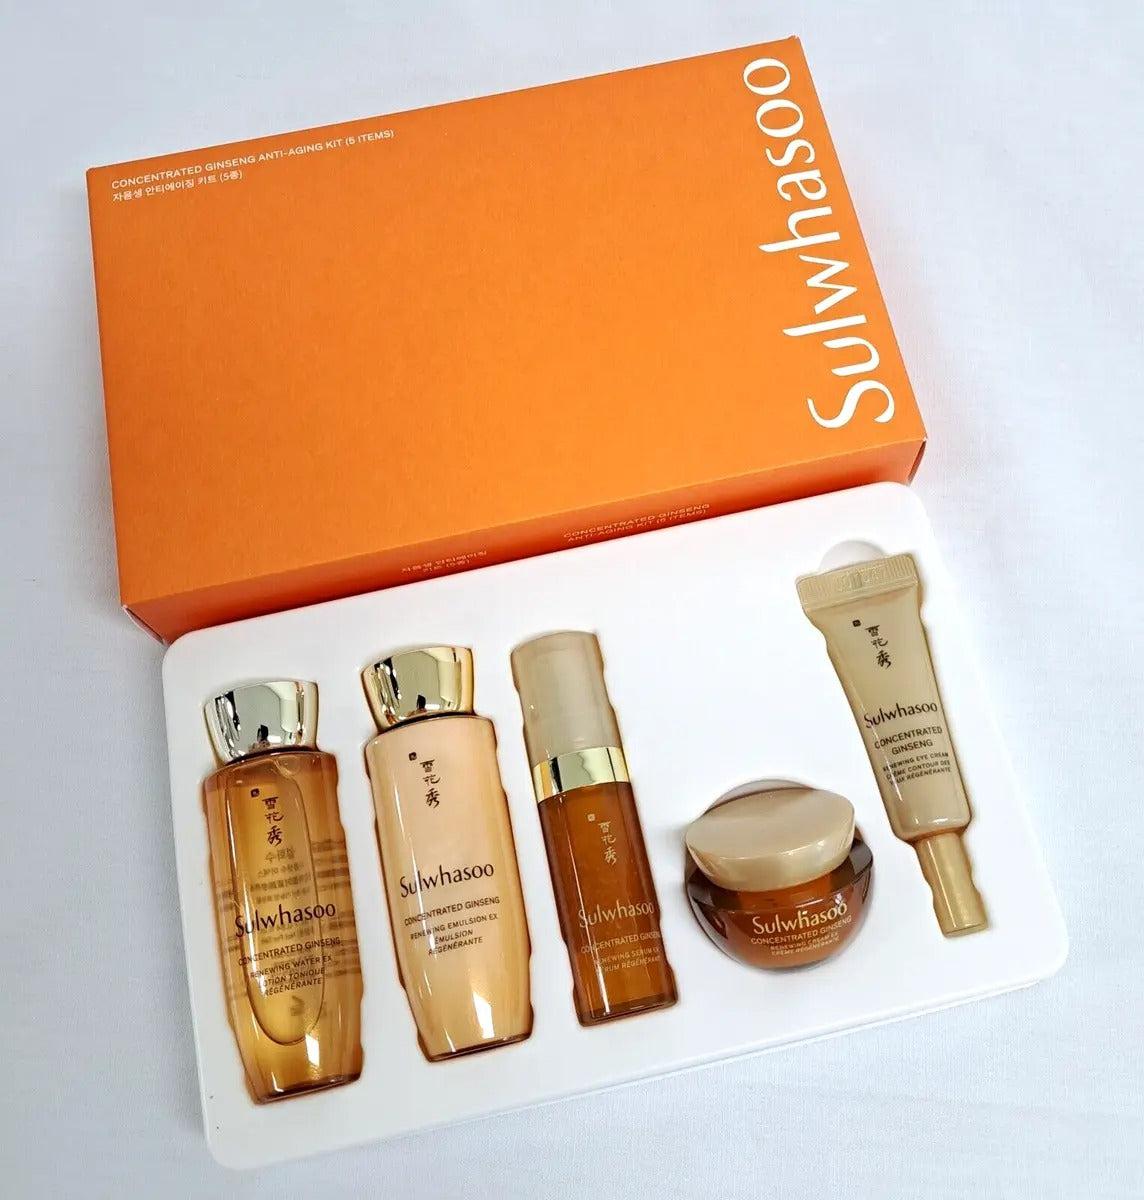 SULWHASOO Concentrated Ginseng Anti-Aging Kit (5 items)